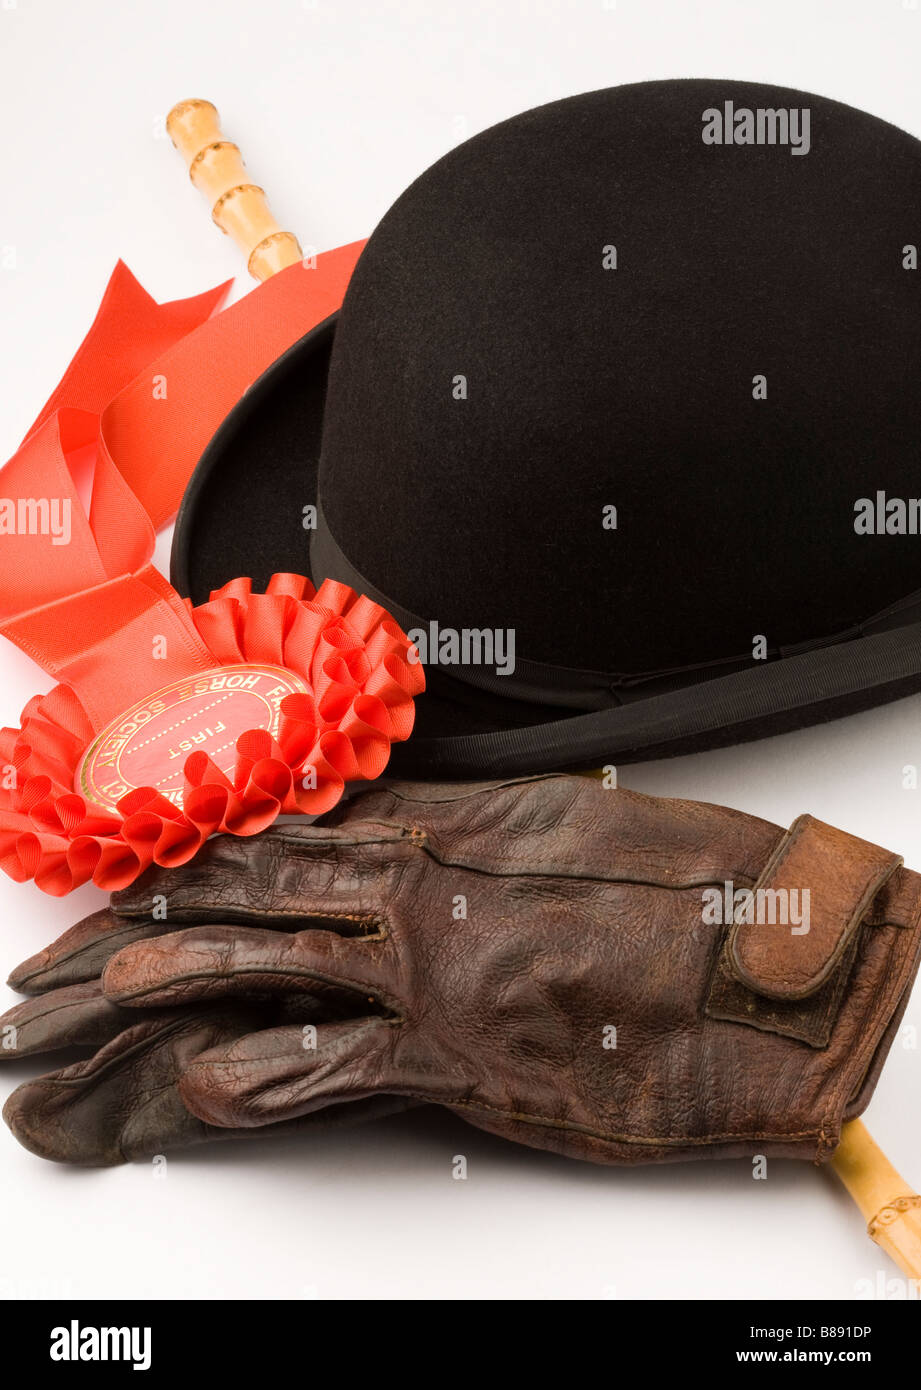 Equestrian Bowler Hat Gloves Rosette and Cane Stock Photo